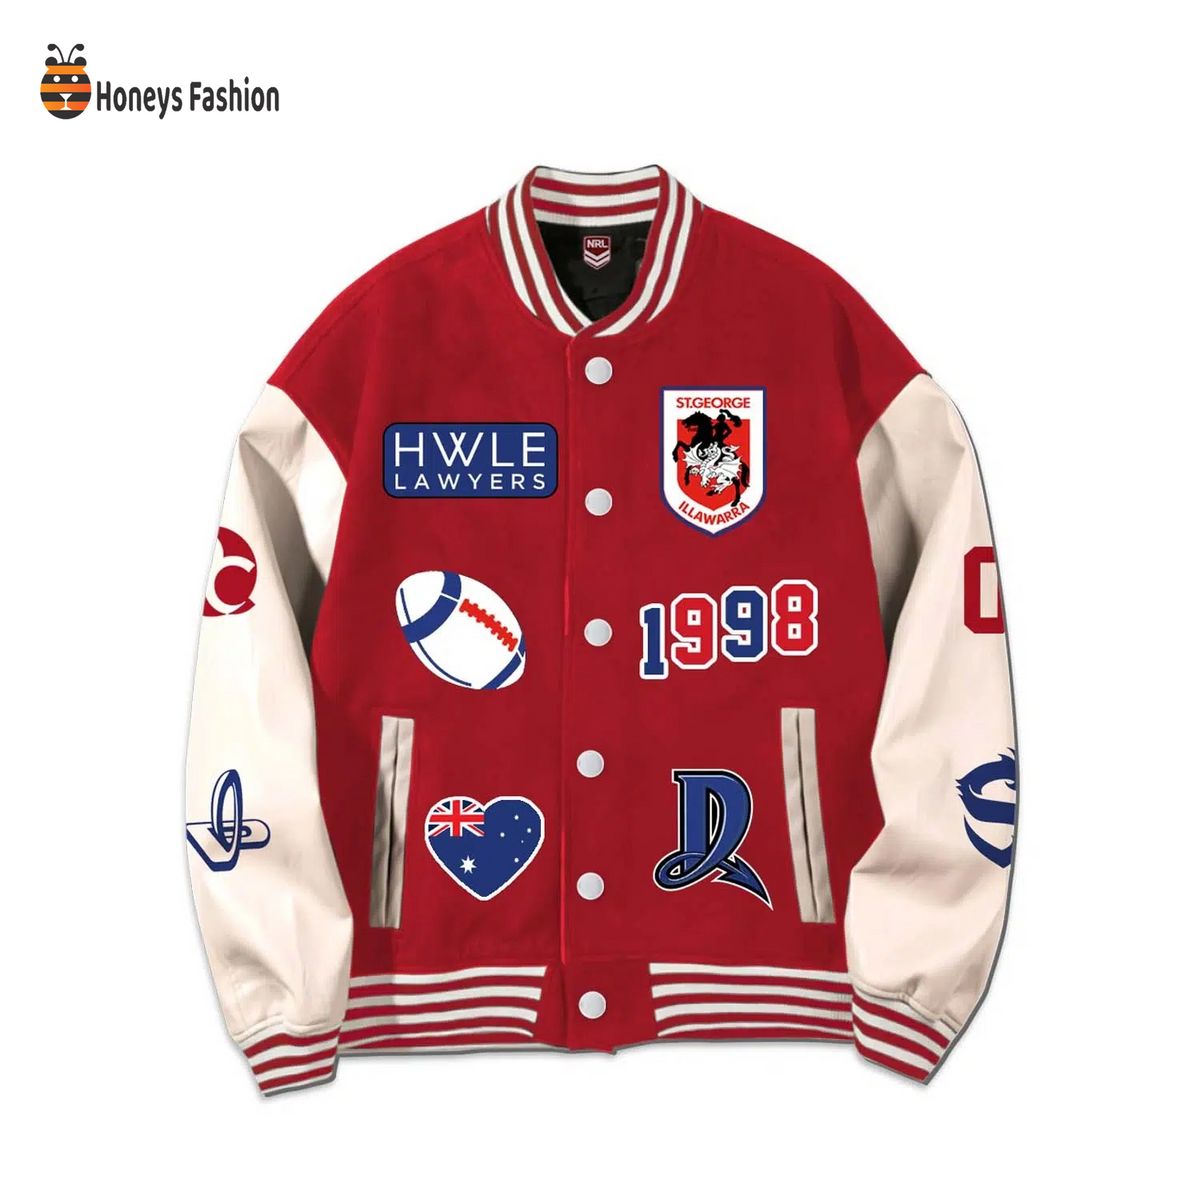 St. George Illawarra Dragons Rugby Personalized Jacket